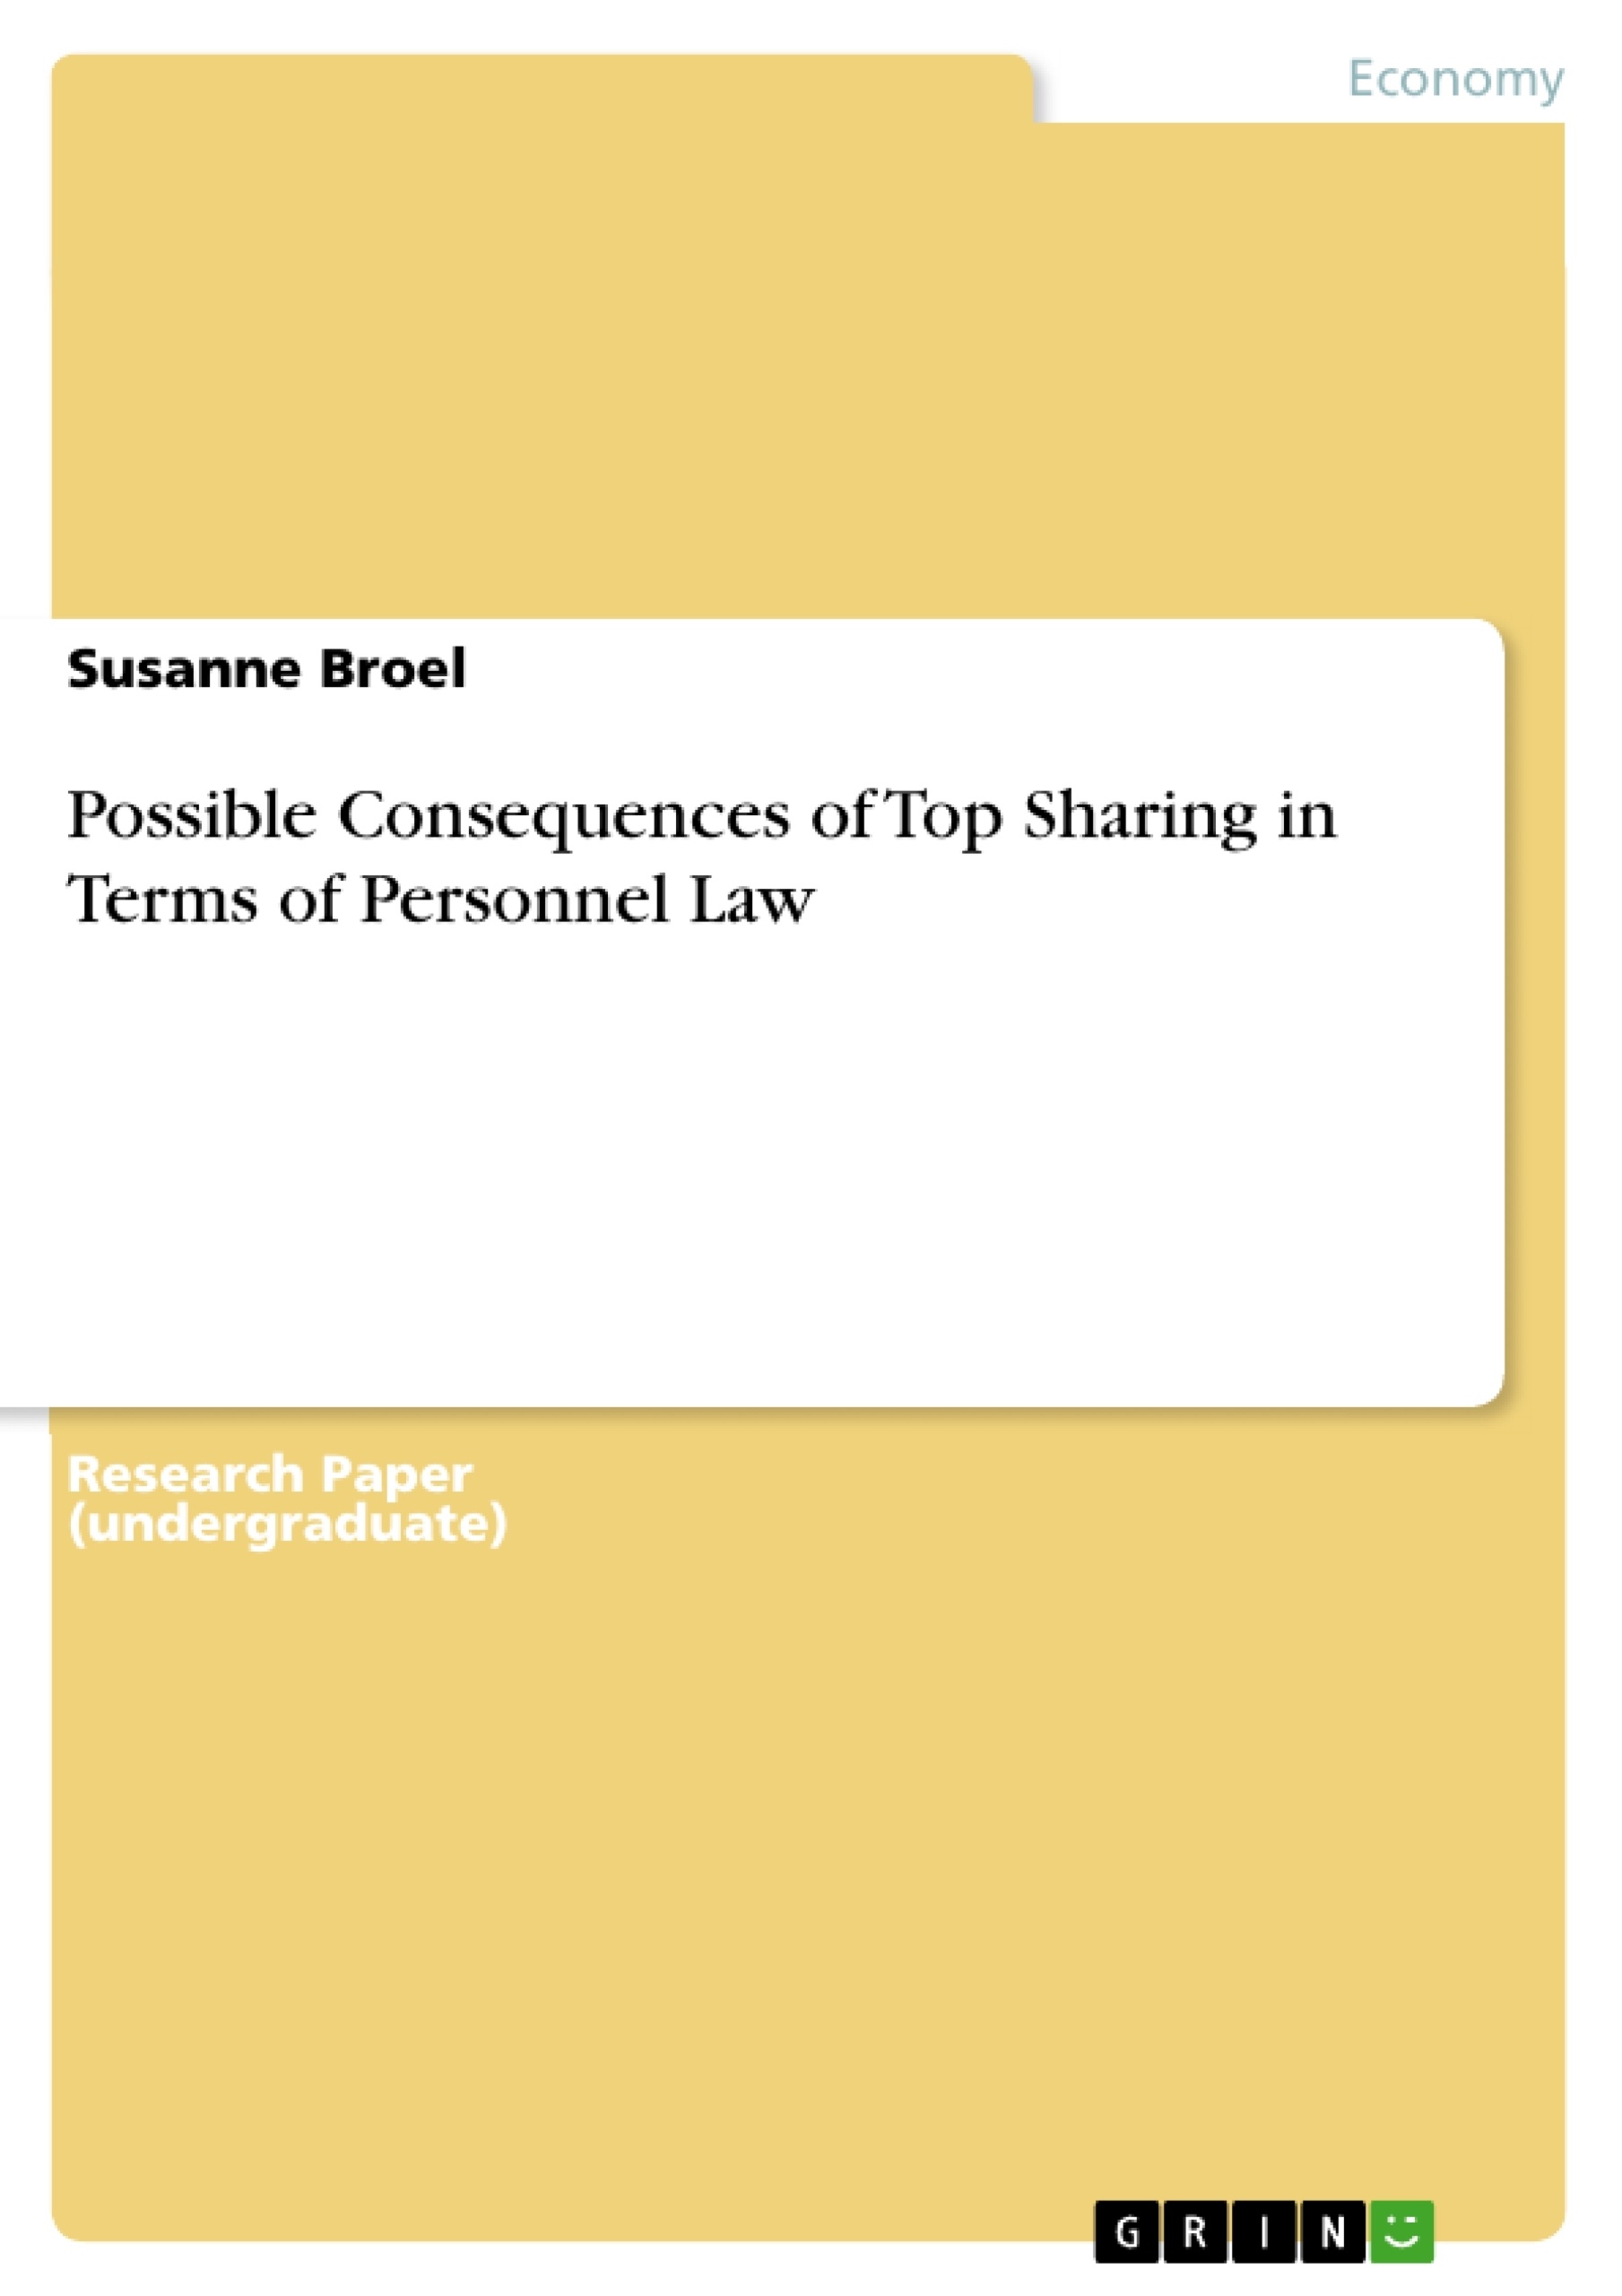 Titre: Possible Consequences of Top Sharing in Terms of Personnel Law